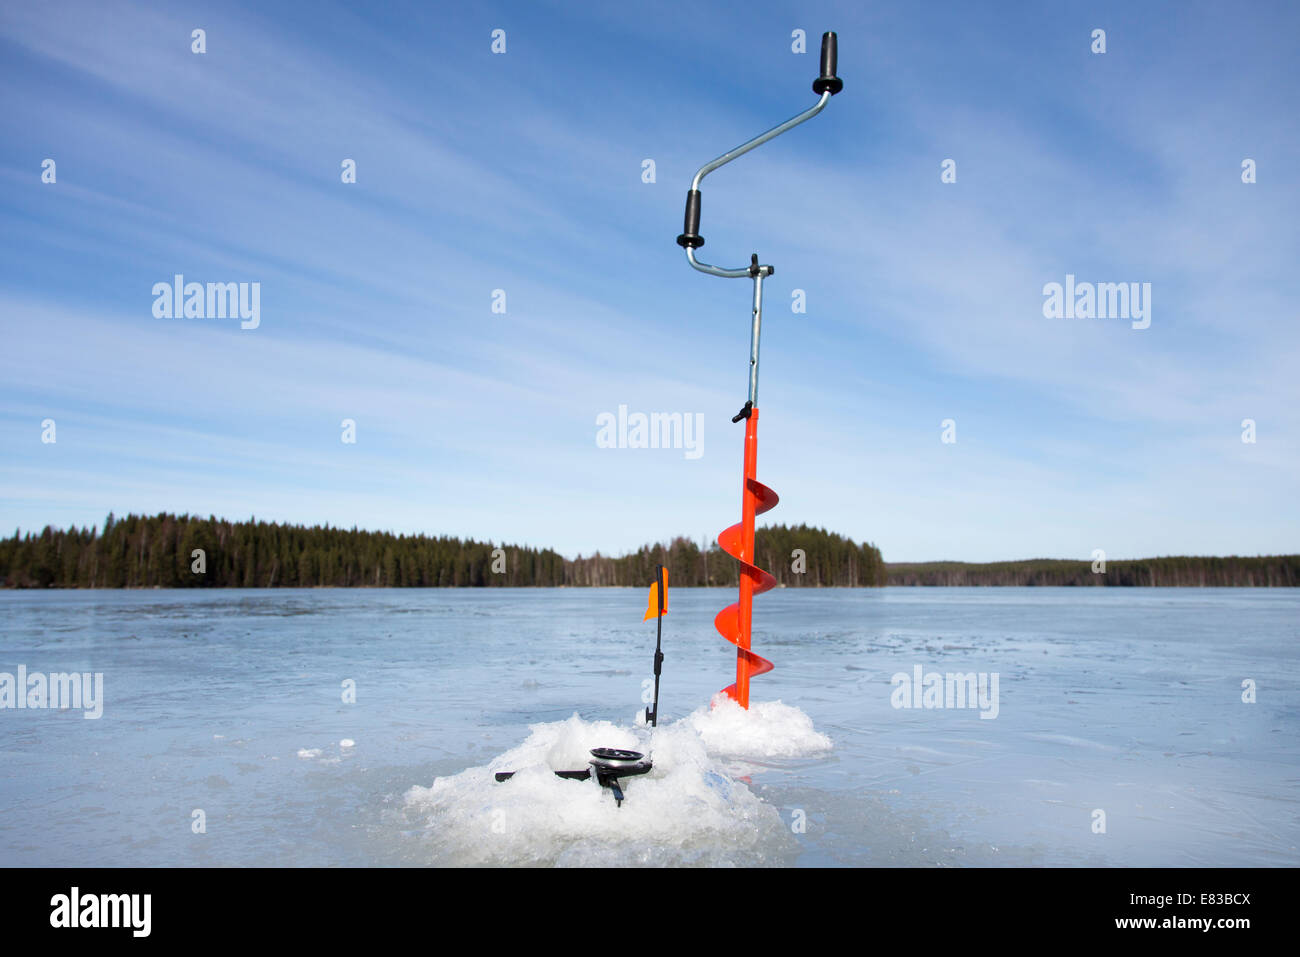 https://c8.alamy.com/comp/E83BCX/hand-ice-auger-and-tip-up-ice-fishing-rod-at-frozen-lake-at-winter-E83BCX.jpg